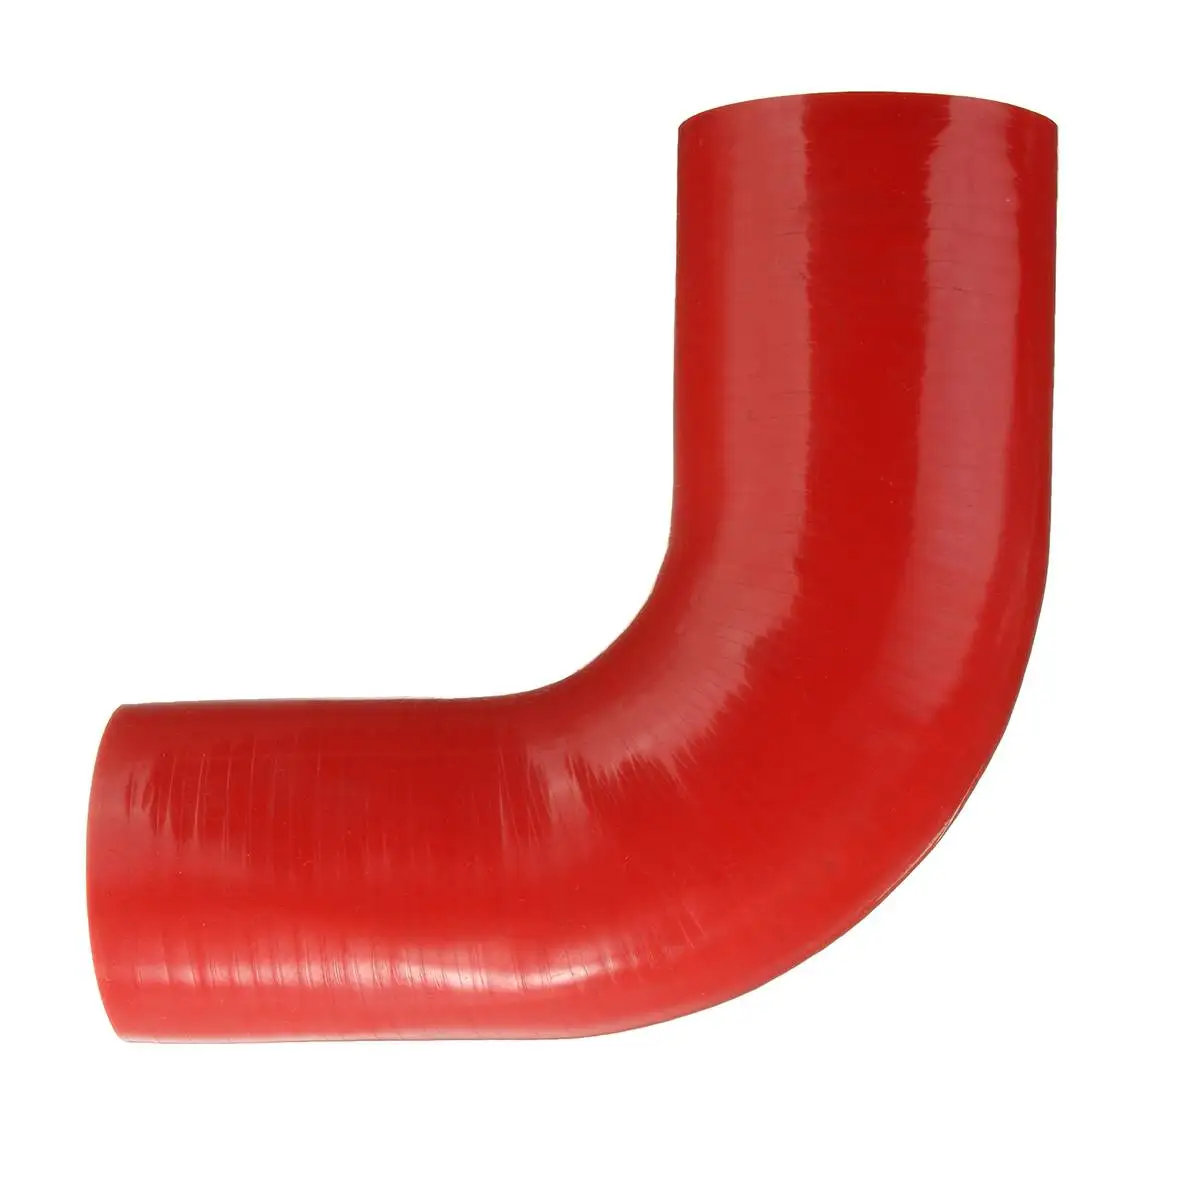 90 Degree Reducers Silicone Hoses Rubber Elbow Bend Coolant Pad Joiner Pipe Tube